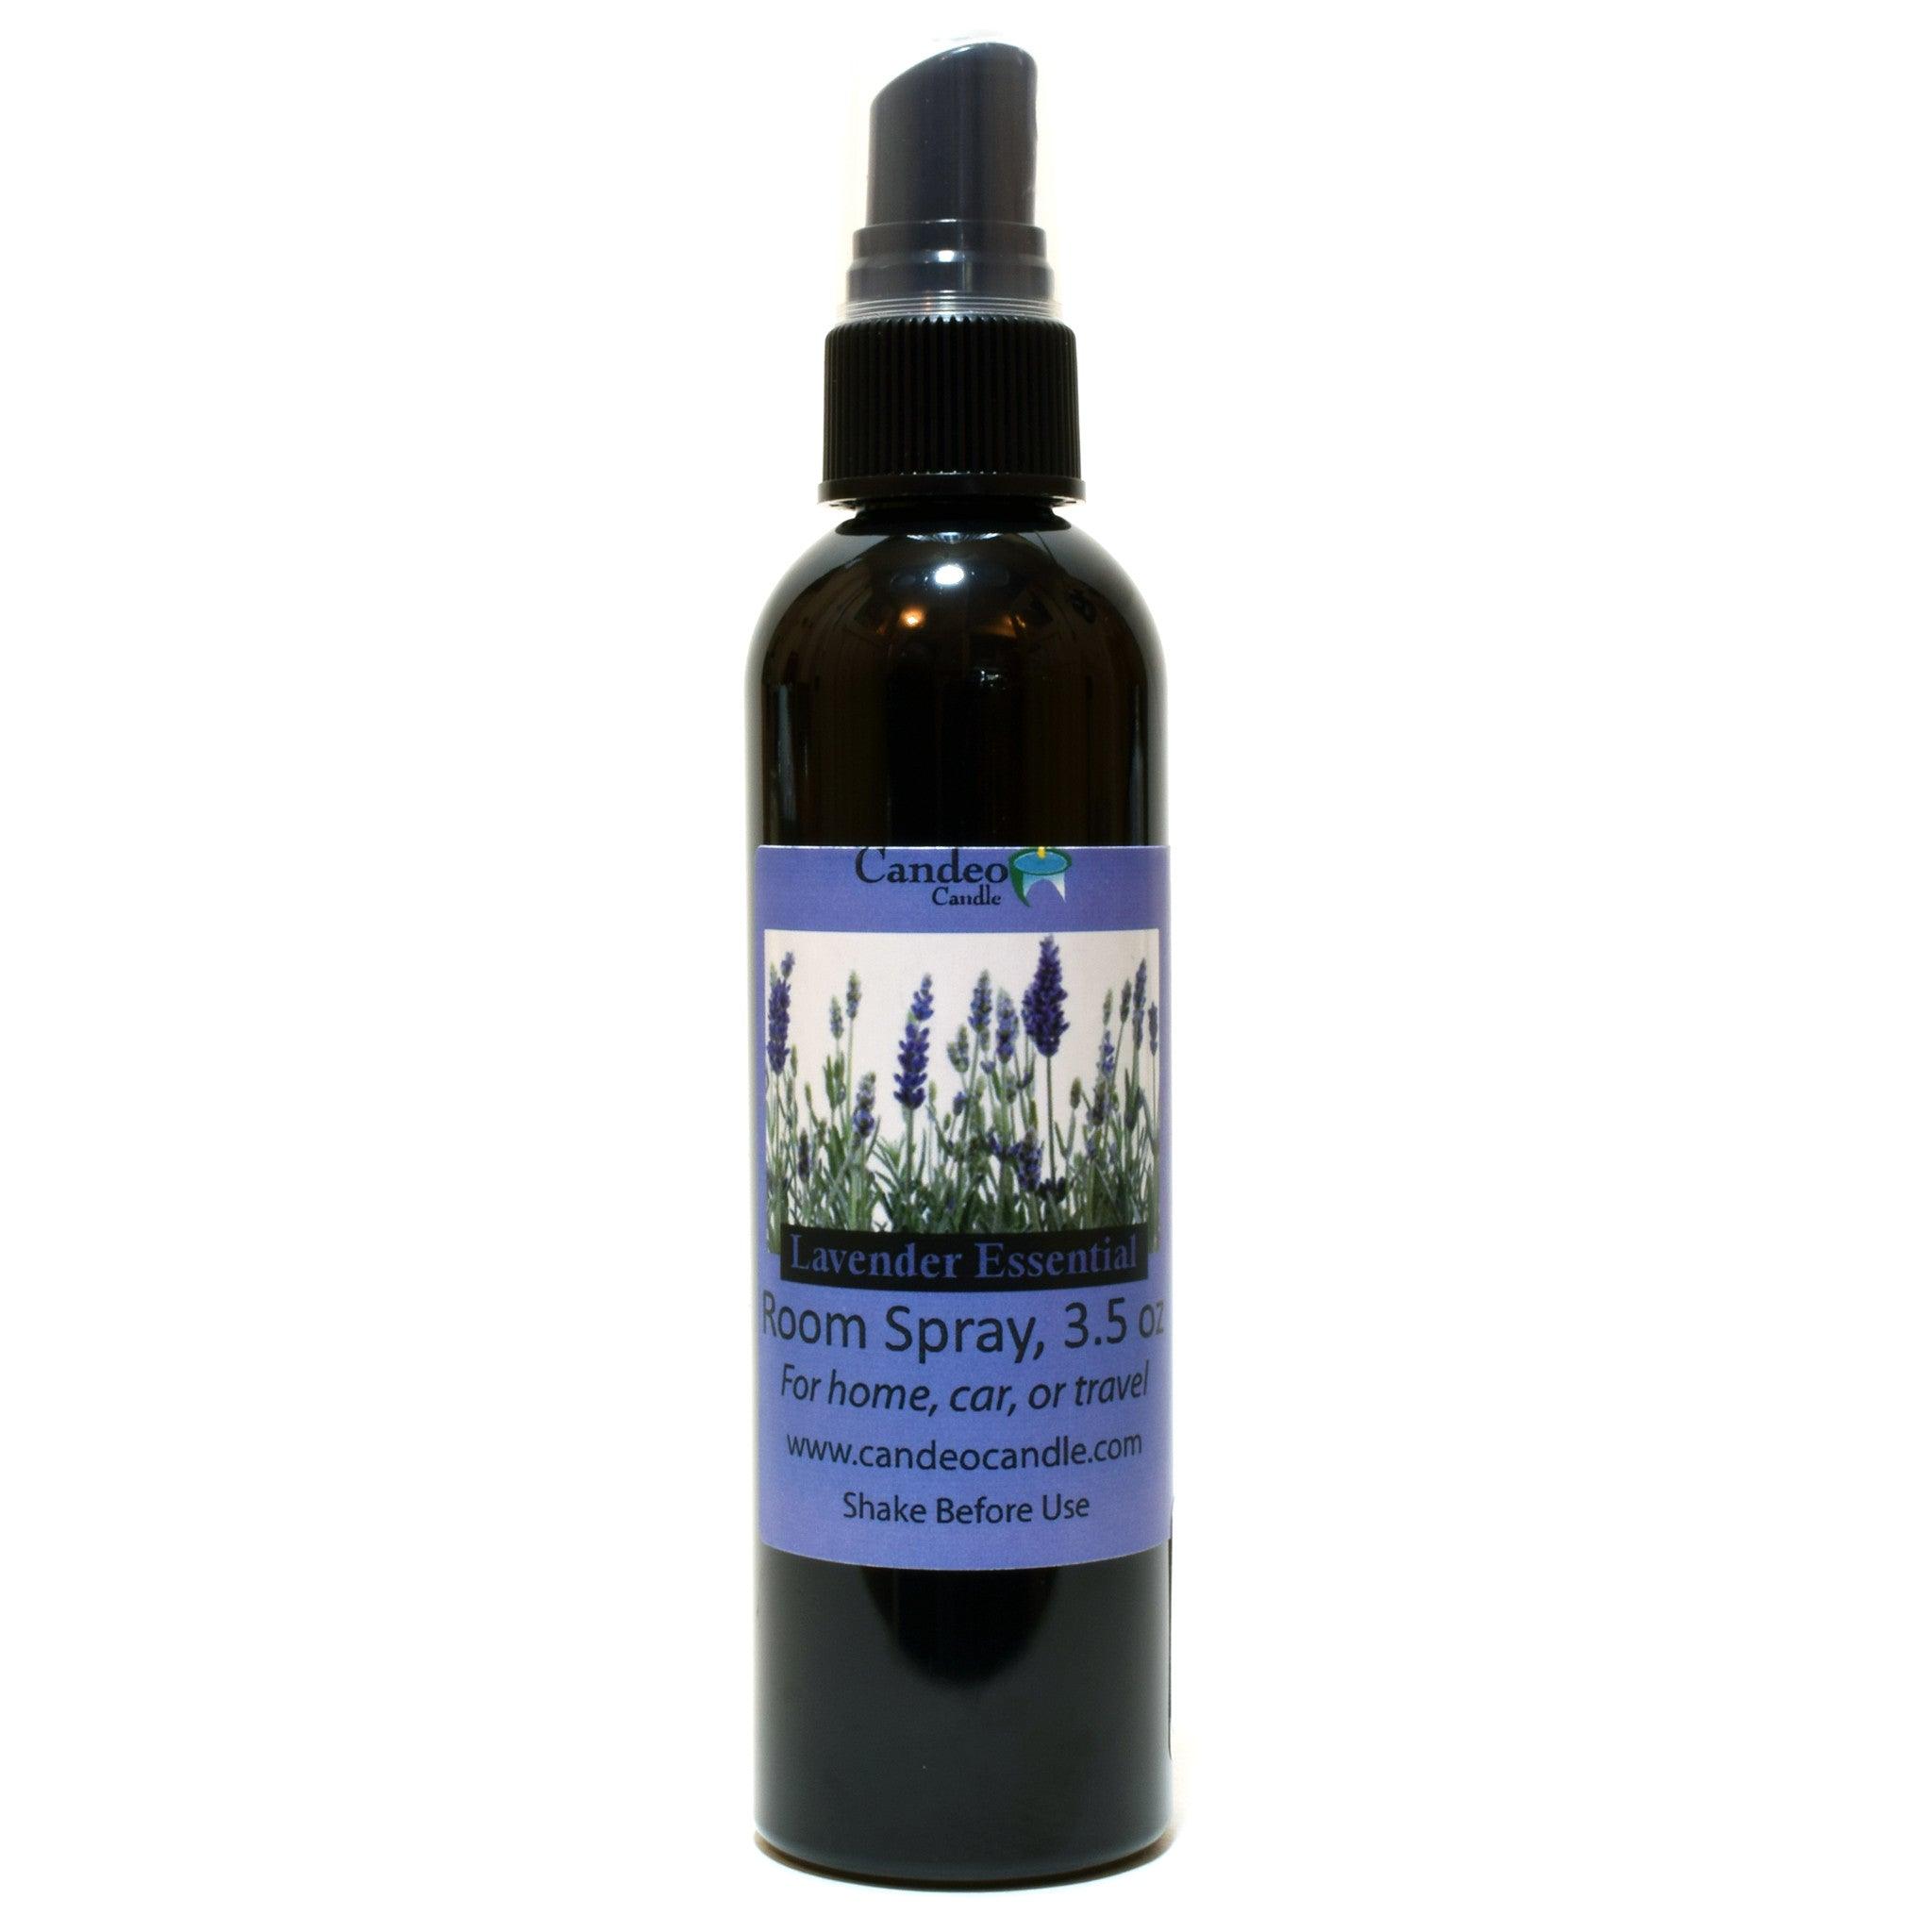 Lavender Essential Oil, 3.5 oz Room Spray - Candeo Candle